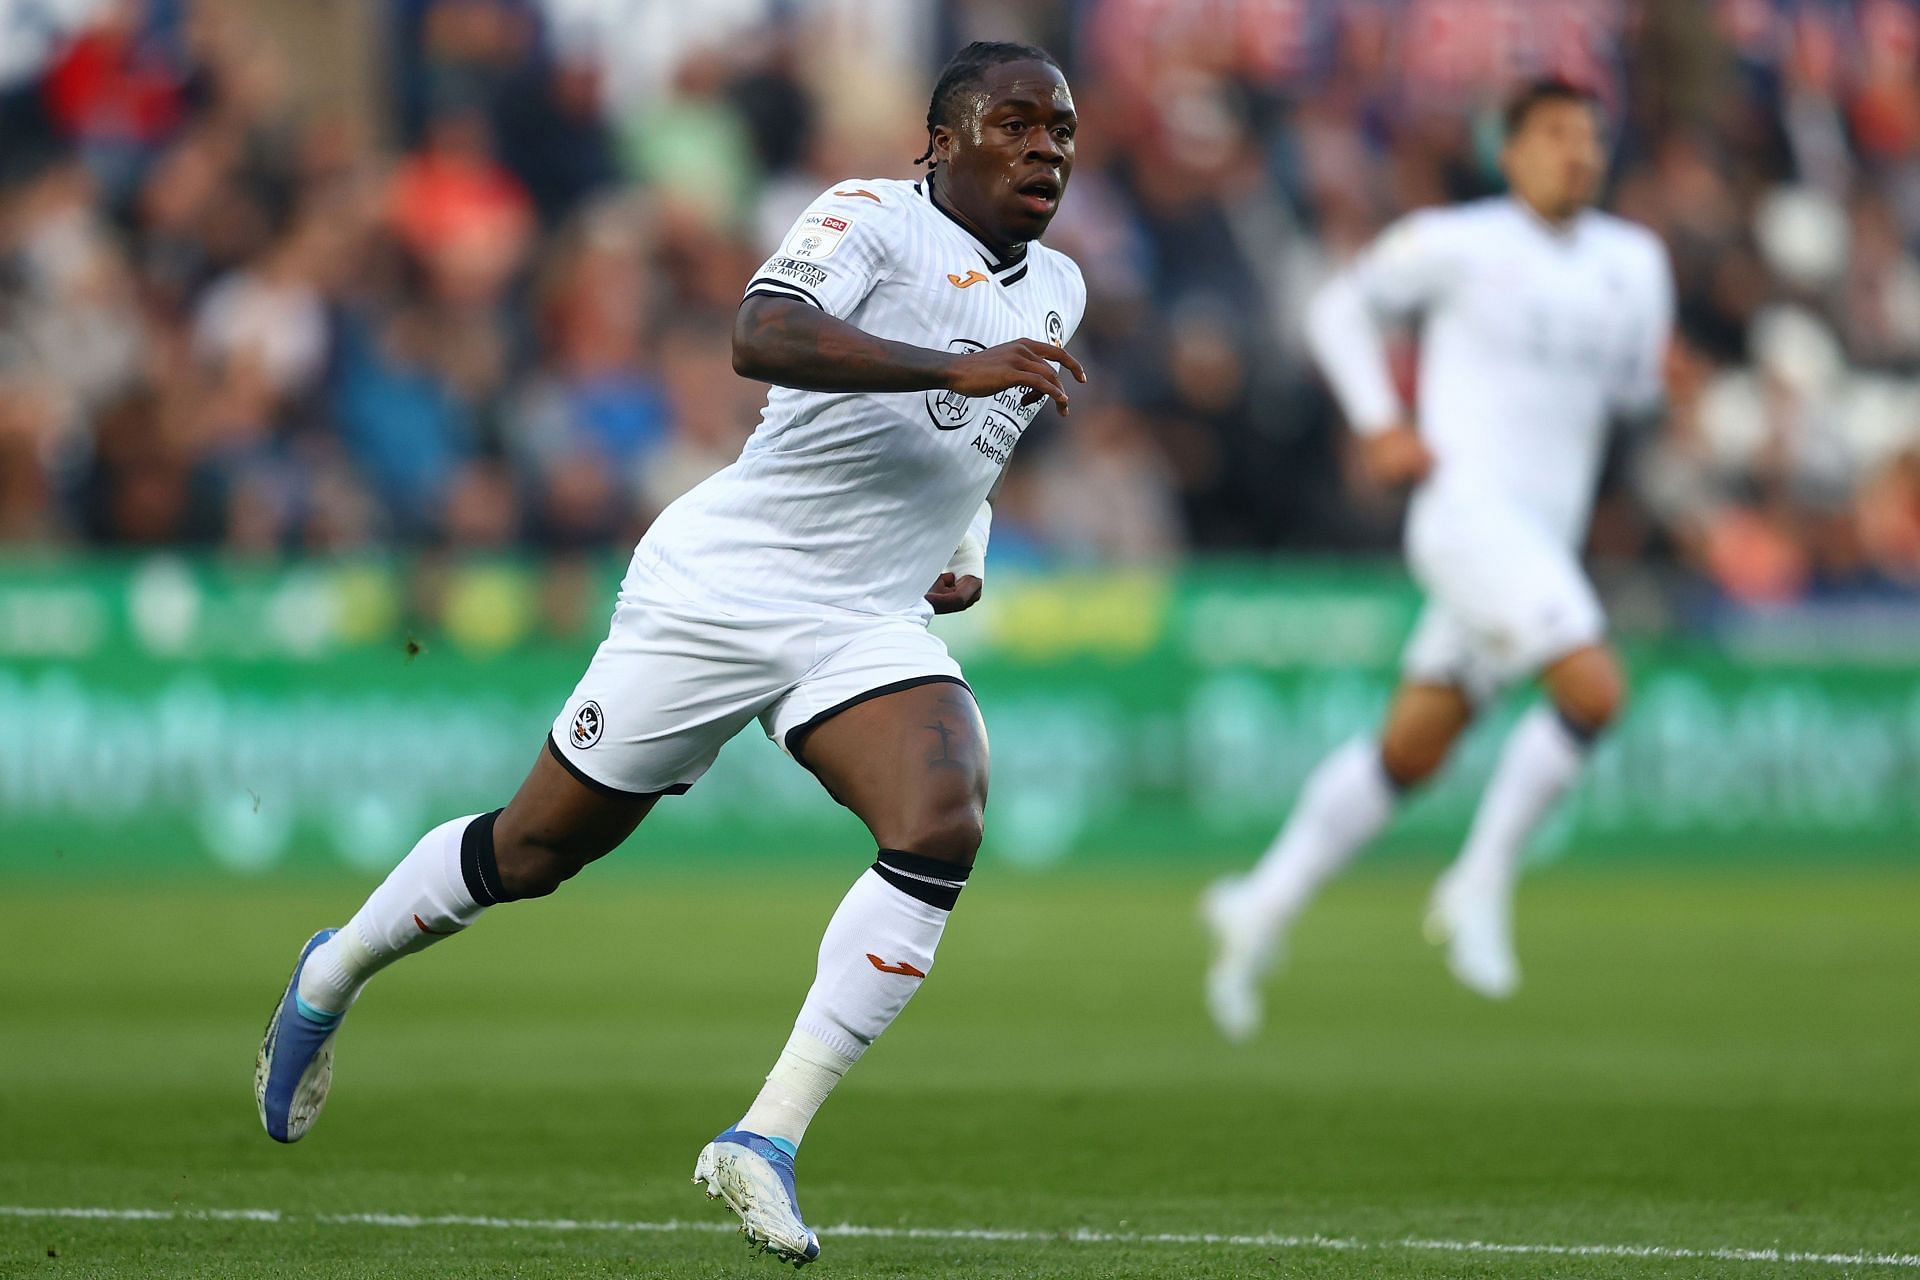 Swansea City in action versus AFC Bournemouth - Sky Bet Championship